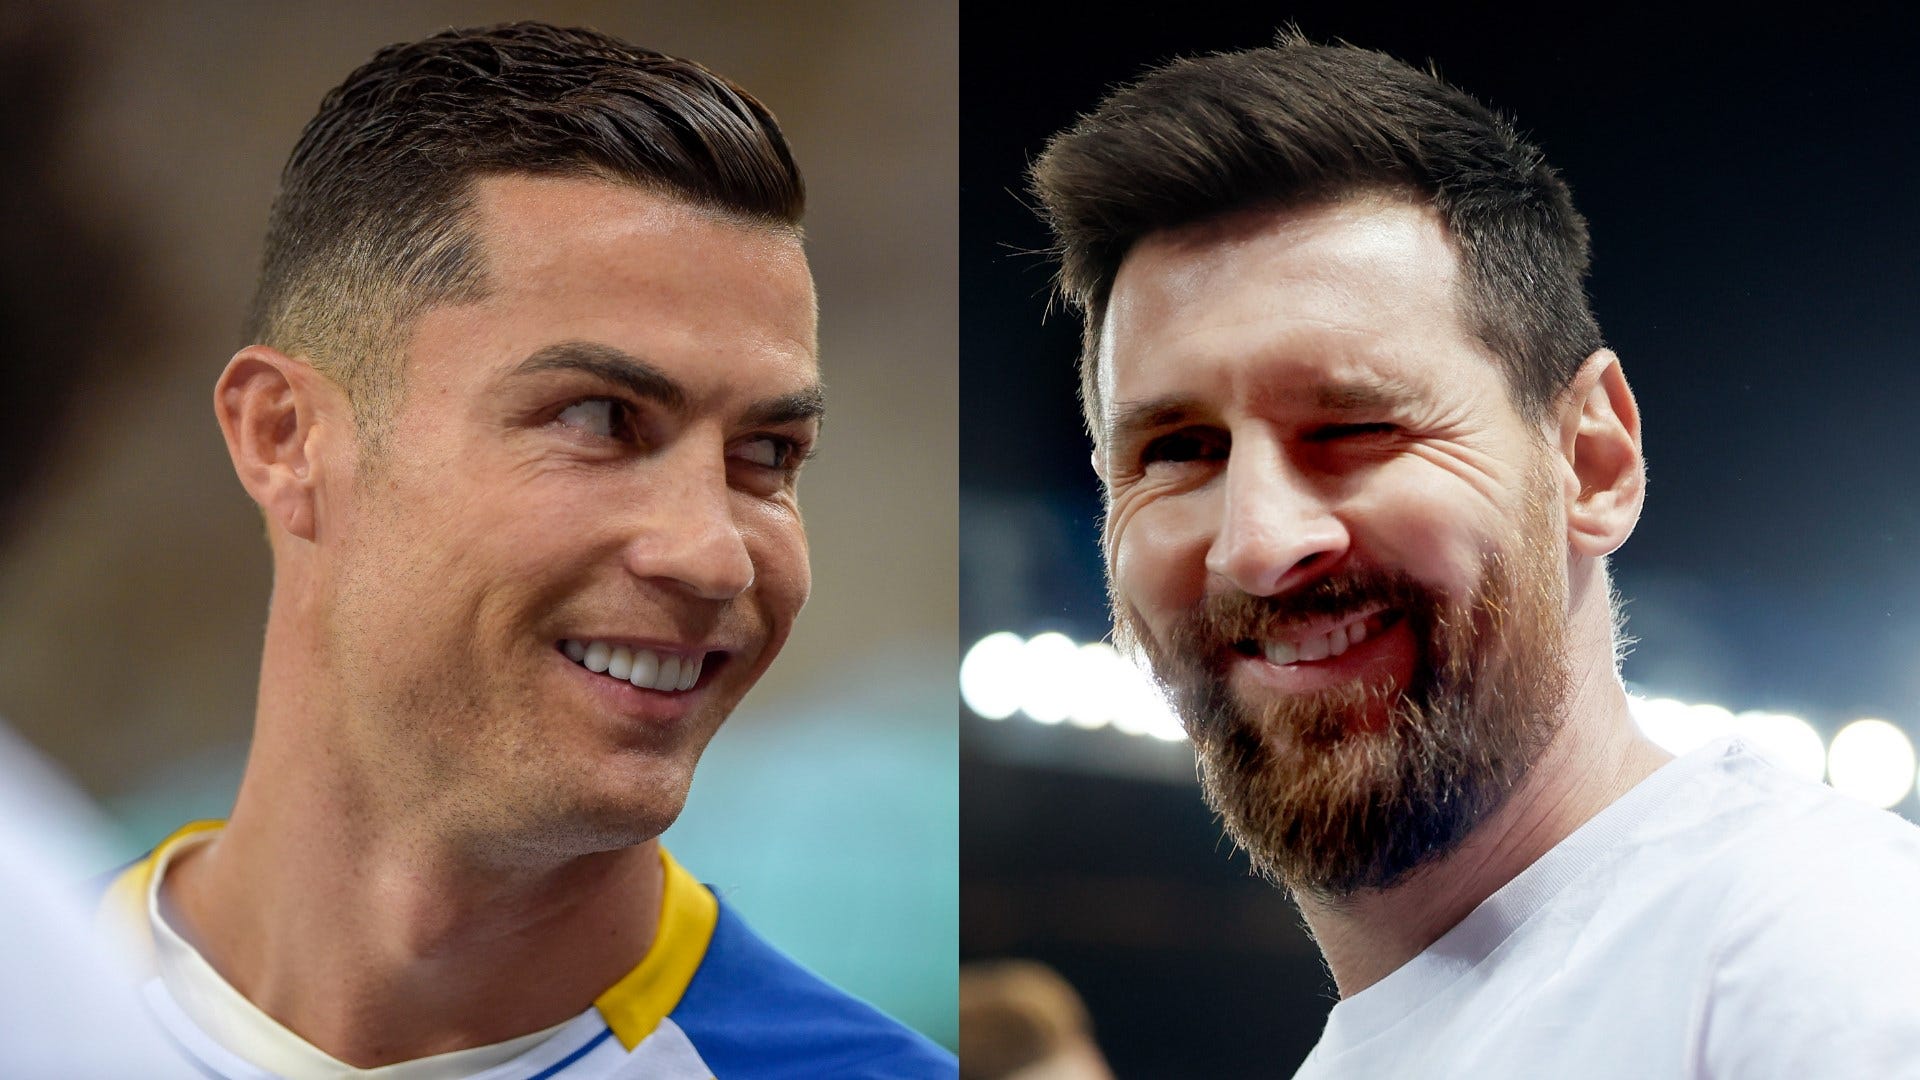 Real Madrid's Cristiano Ronaldo trumps Barcelona's Lionel Messi in Forbes'  most valuable athlete brands 2015 - CityAM